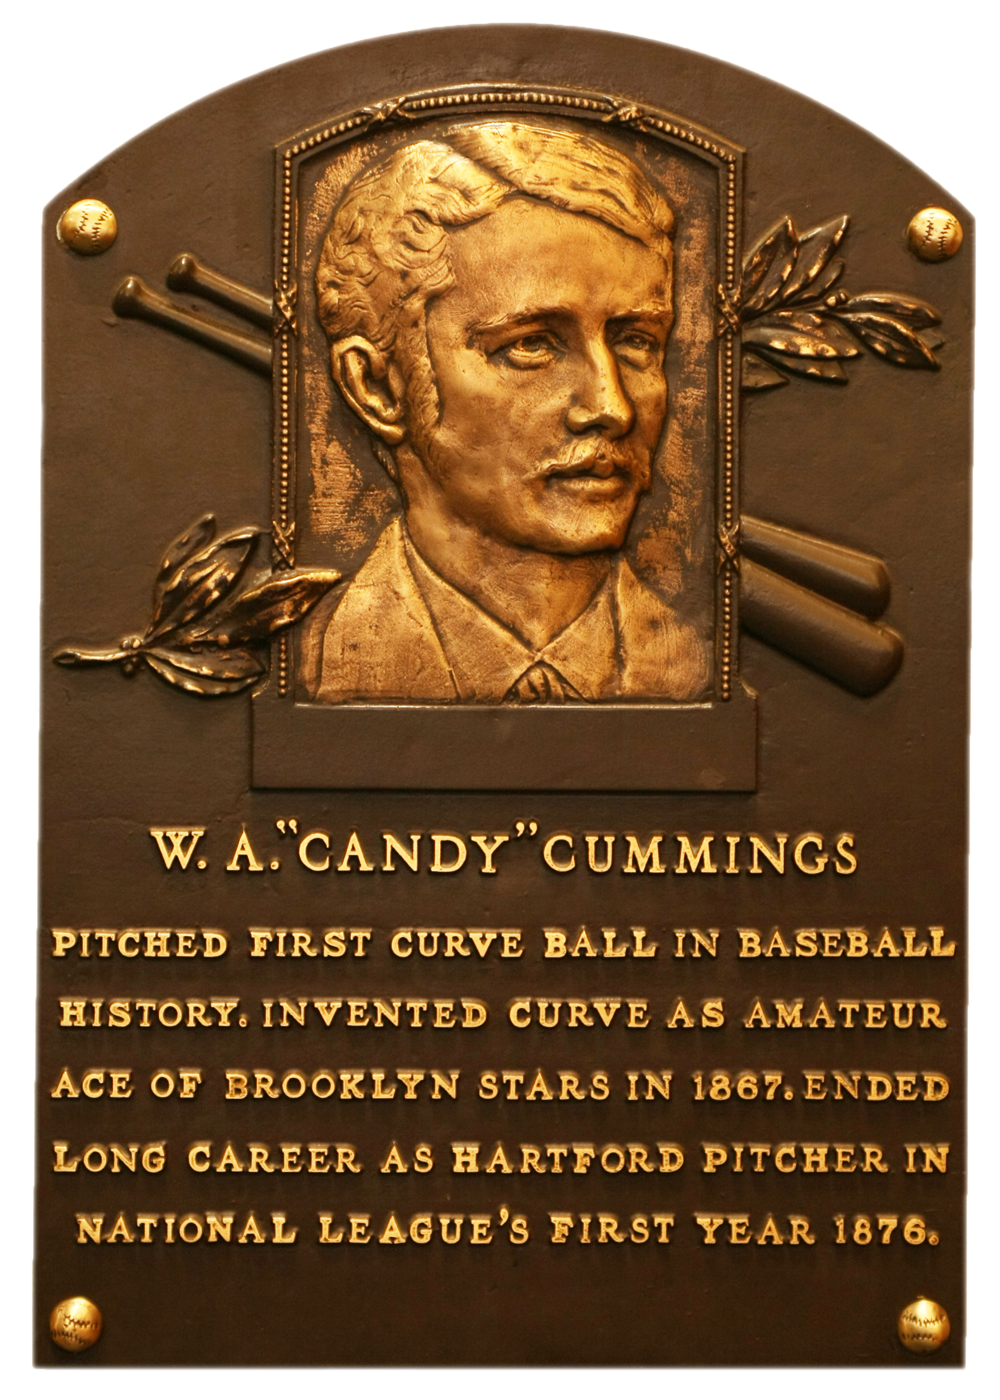 Candy Cummings Hall of Fame plaque